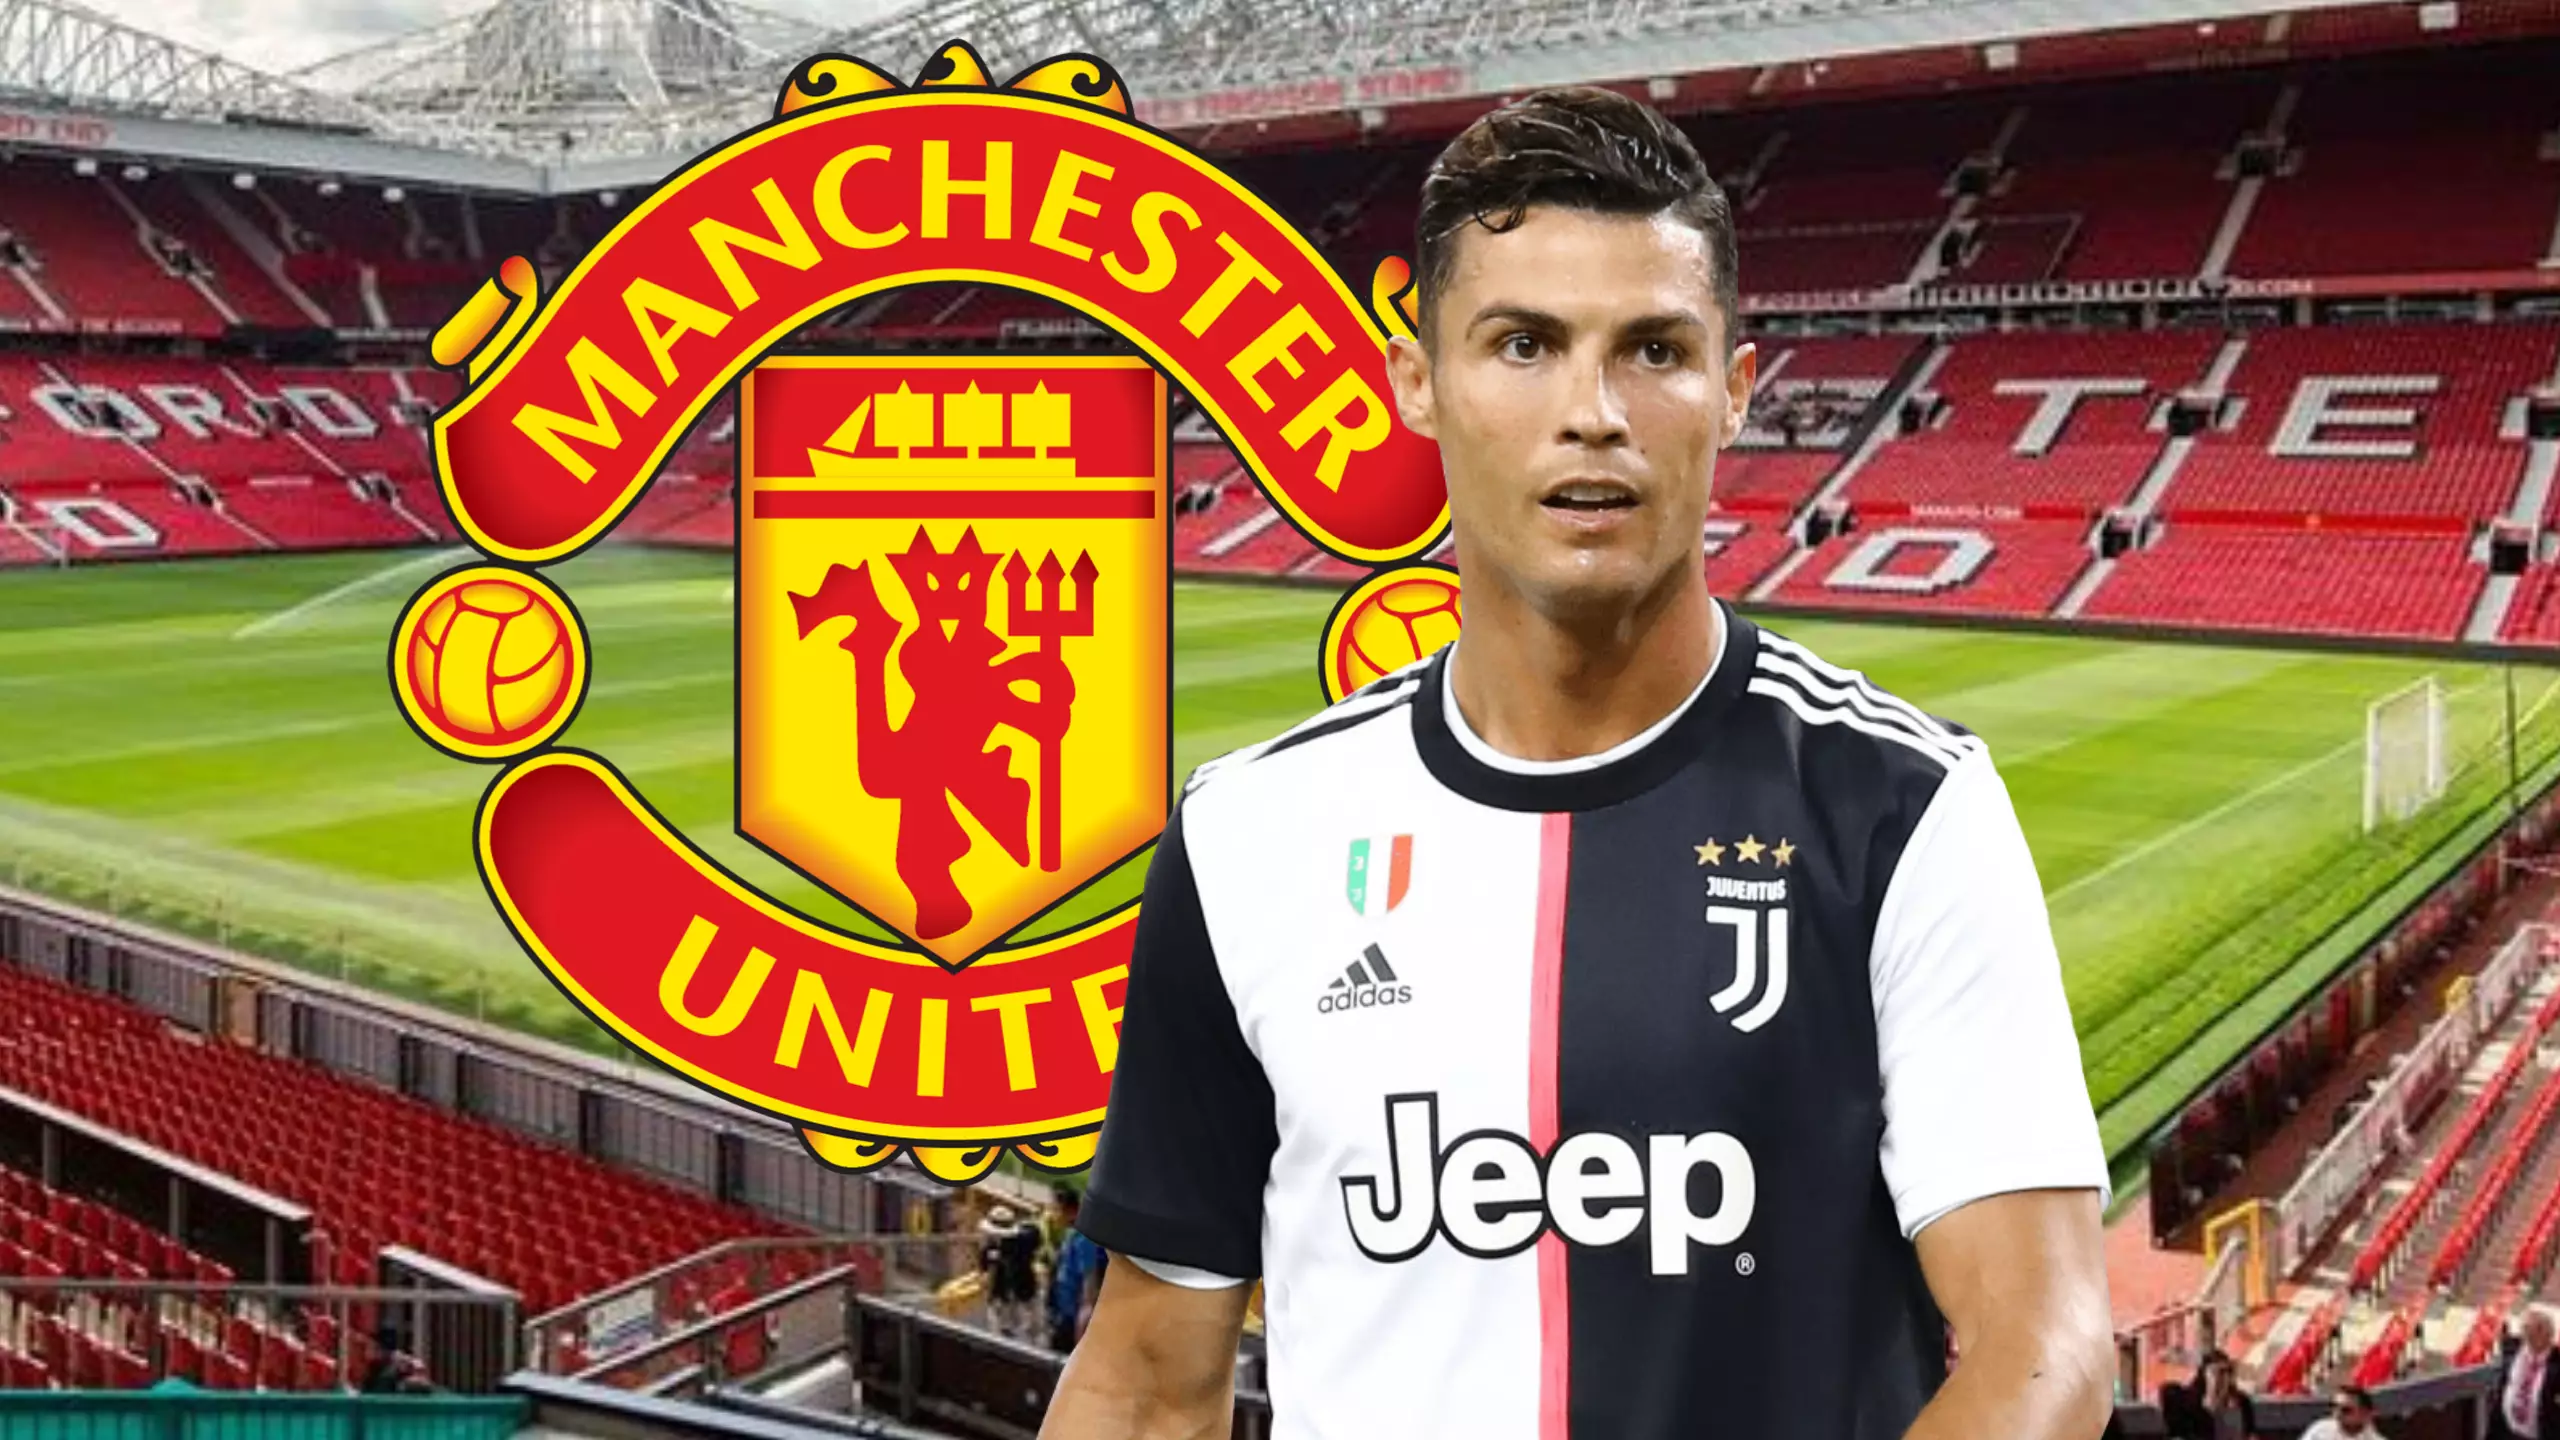 Cristiano Ronaldo Rejoining Man Utd This Summer ‘Would Not Be A Surprise’